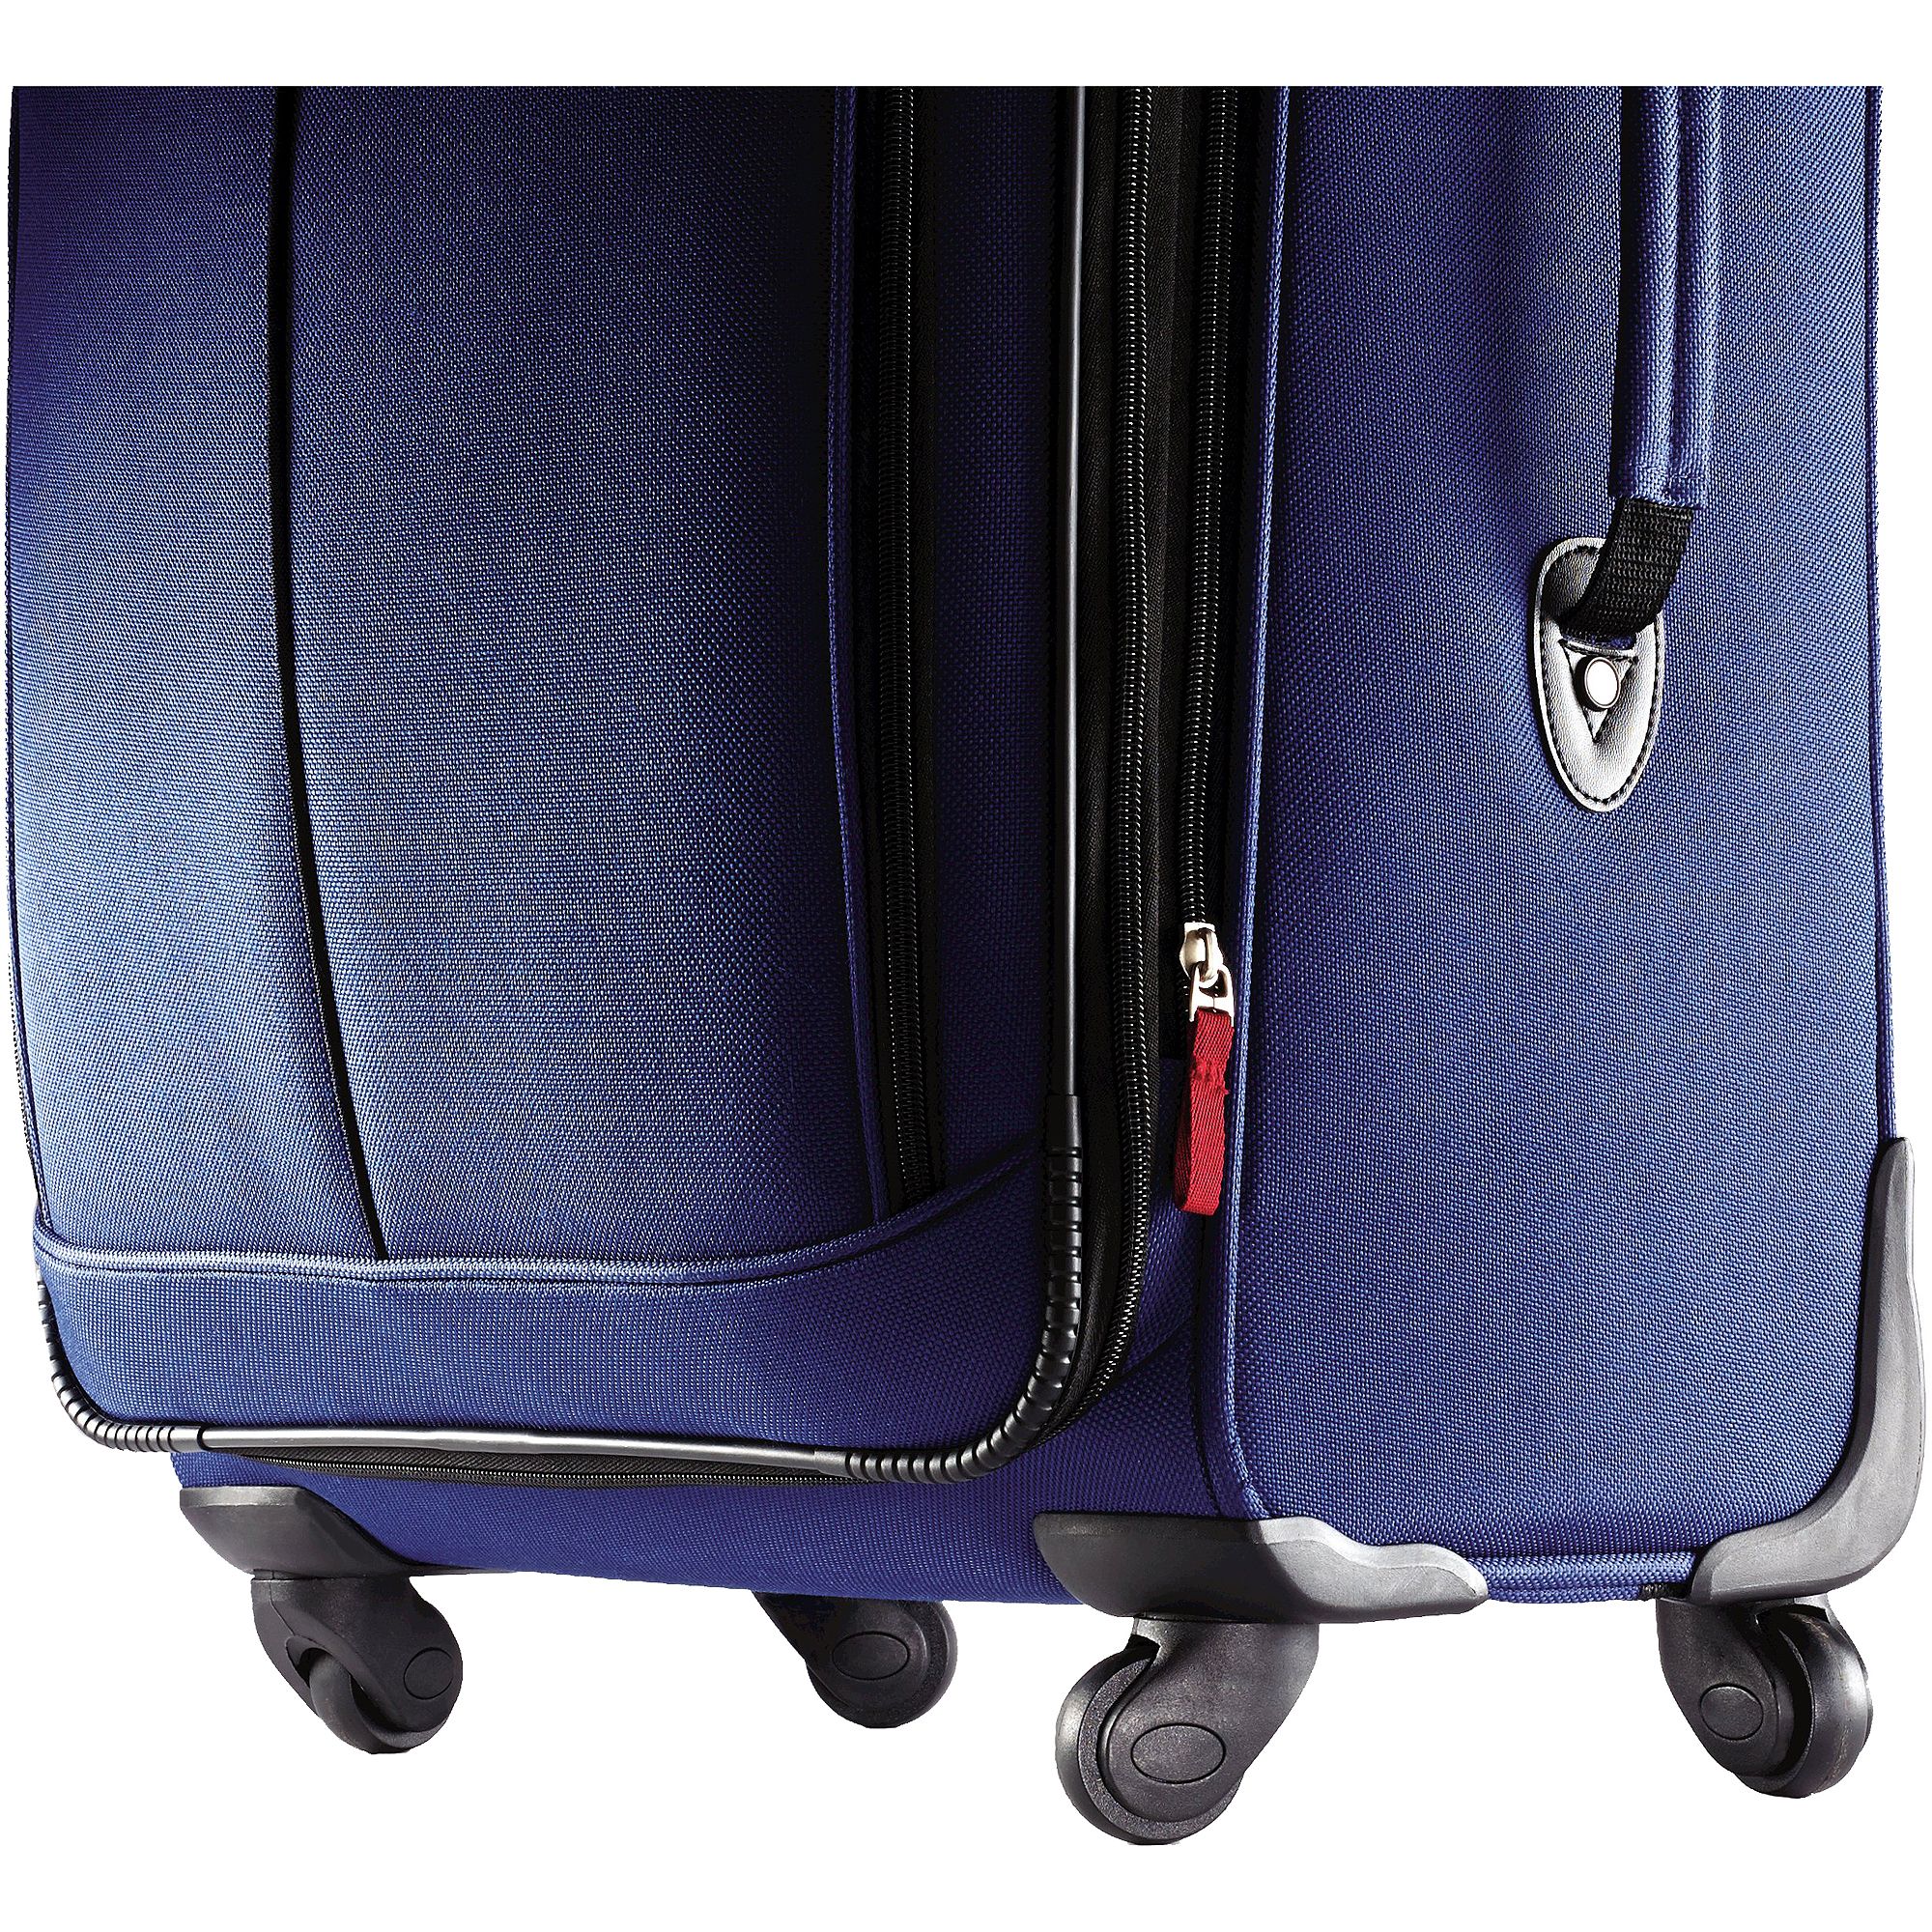 American Tourister 4-Piece Luggage Set - image 5 of 7